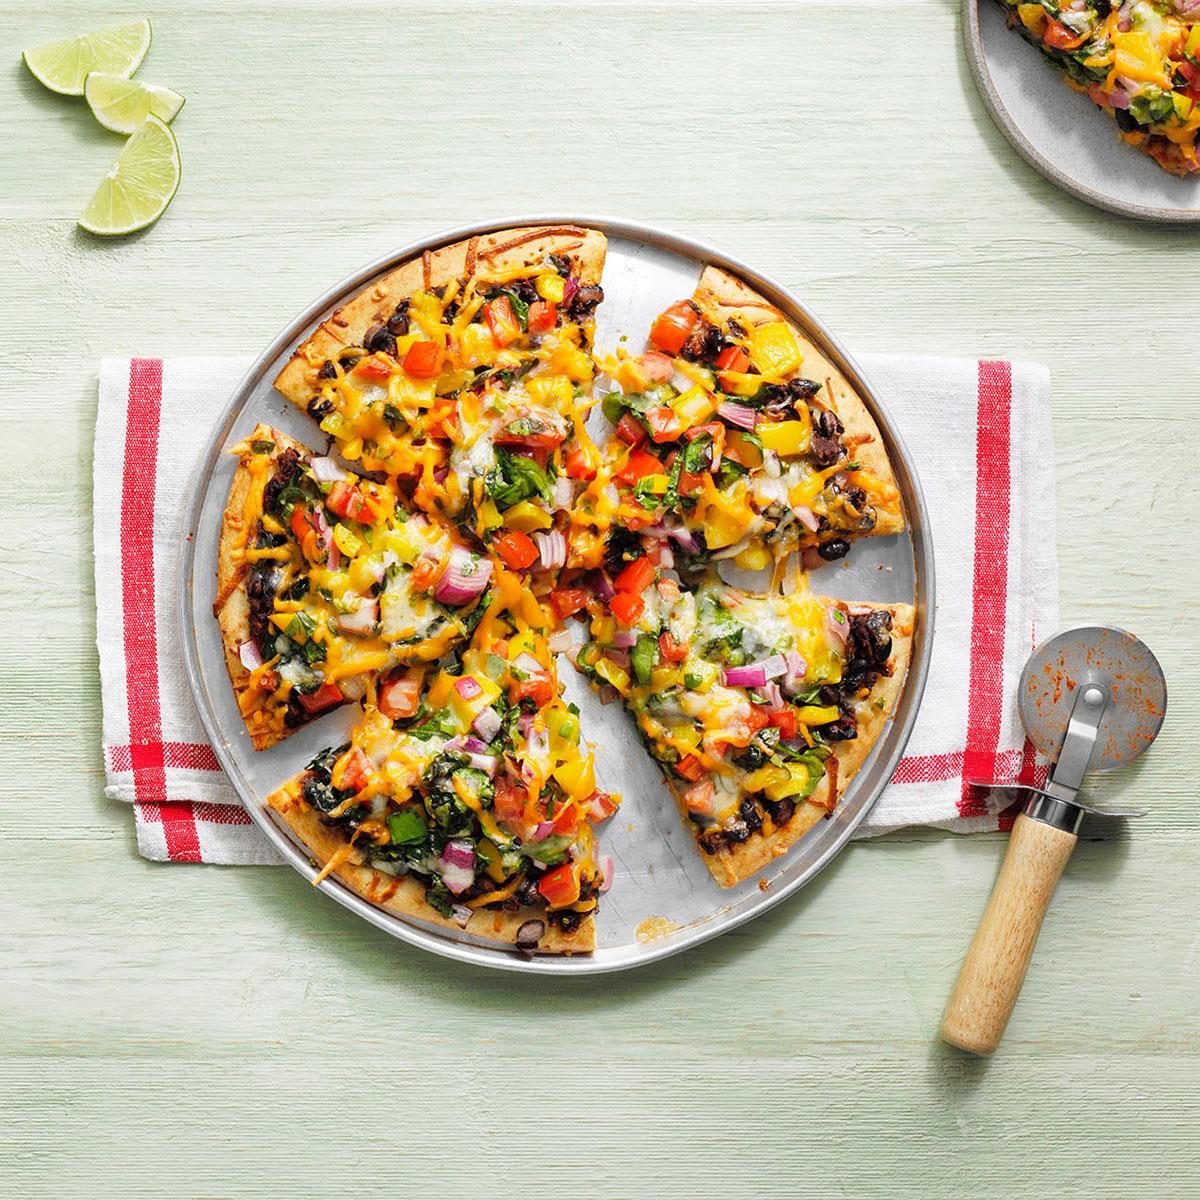 <p>Switch up the pizza toppings for Dad's Day dinner. This recipe uses Mexican toppings like jalapeños and cilantro.</p> <div class="listicle-page__buttons"> <div class="listicle-page__cta-button"><a href='https://www.tasteofhome.com/recipes/loaded-mexican-pizza/'>Go to Recipe</a></div> </div>